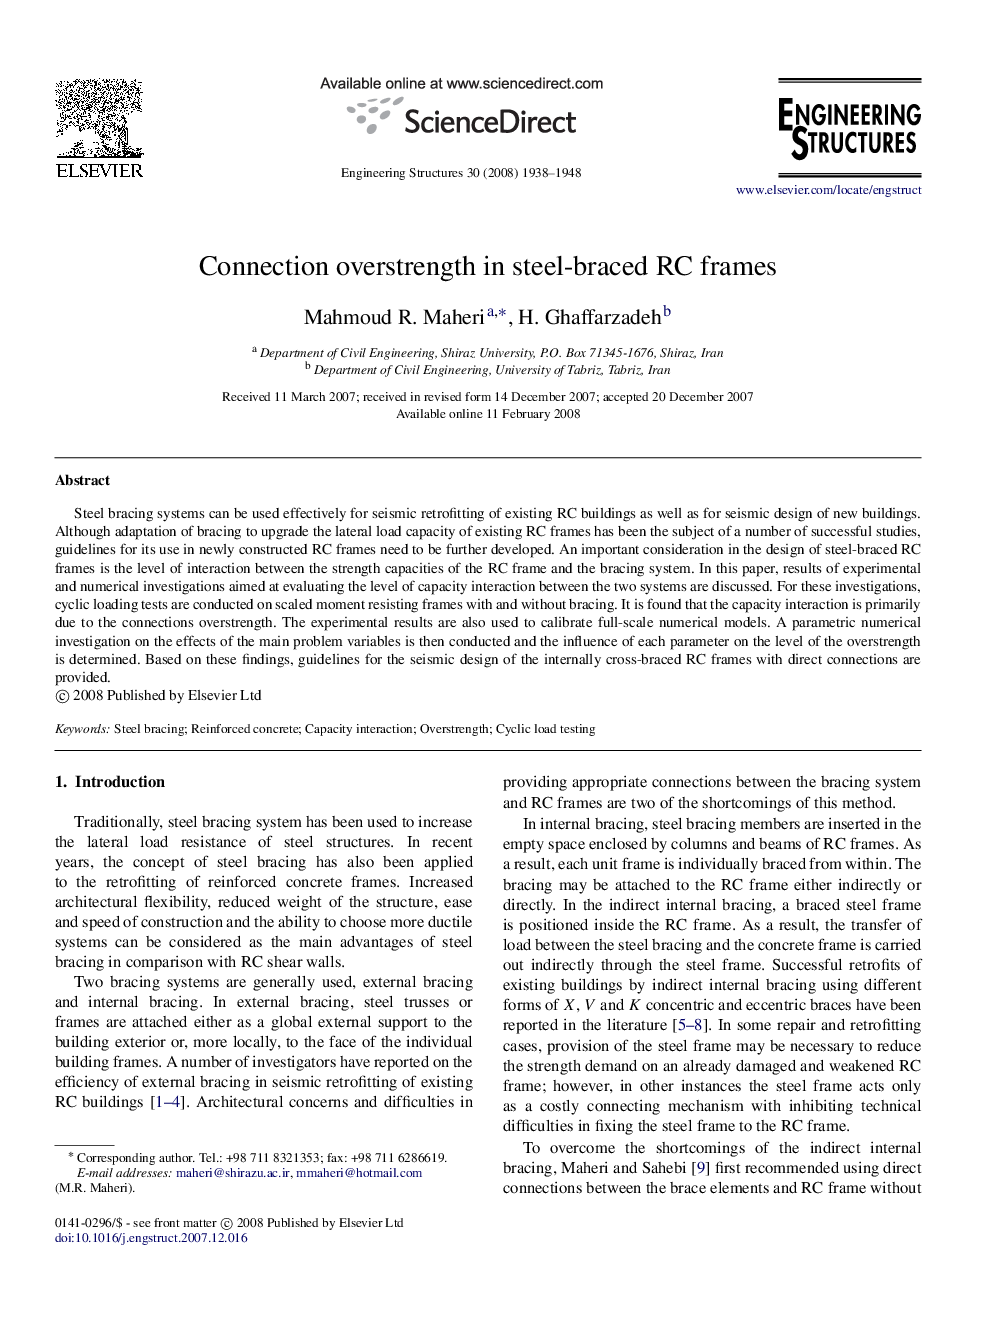 Connection overstrength in steel-braced RC frames